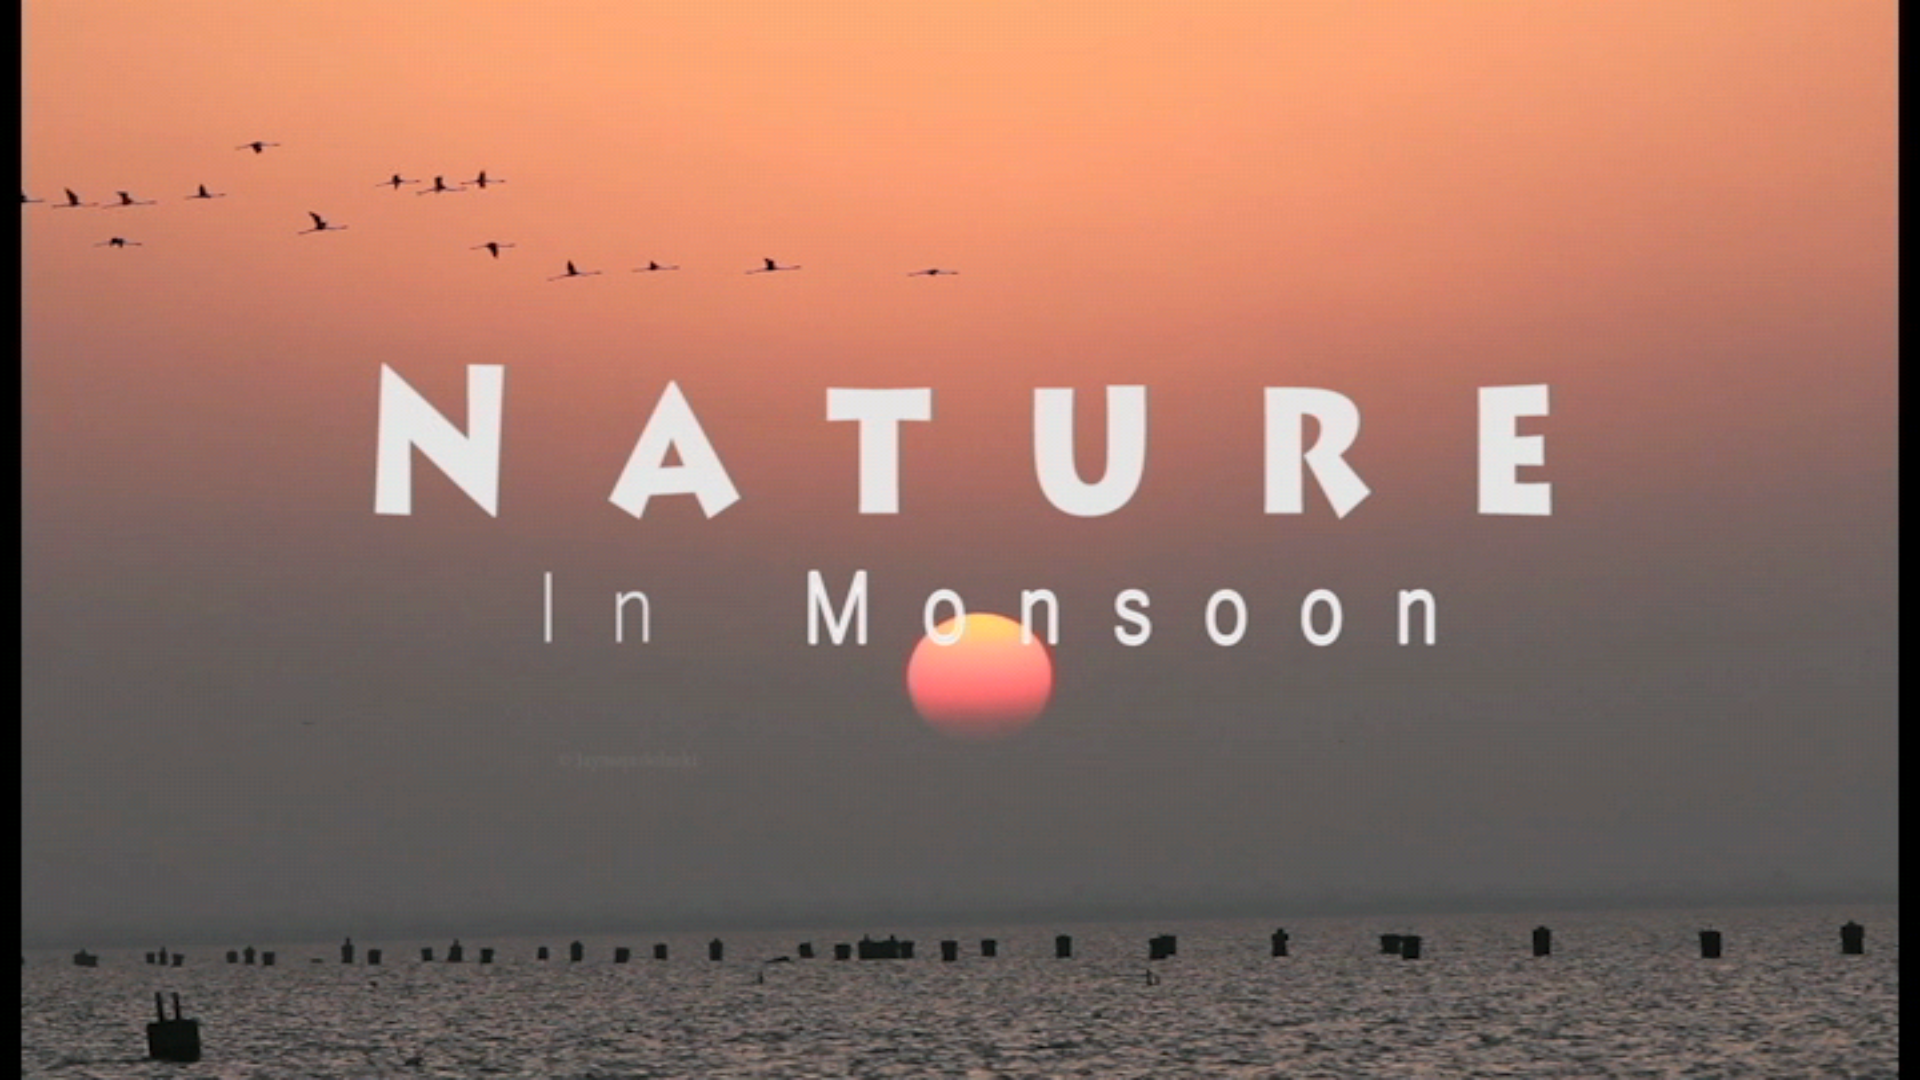 Nature in monsoon